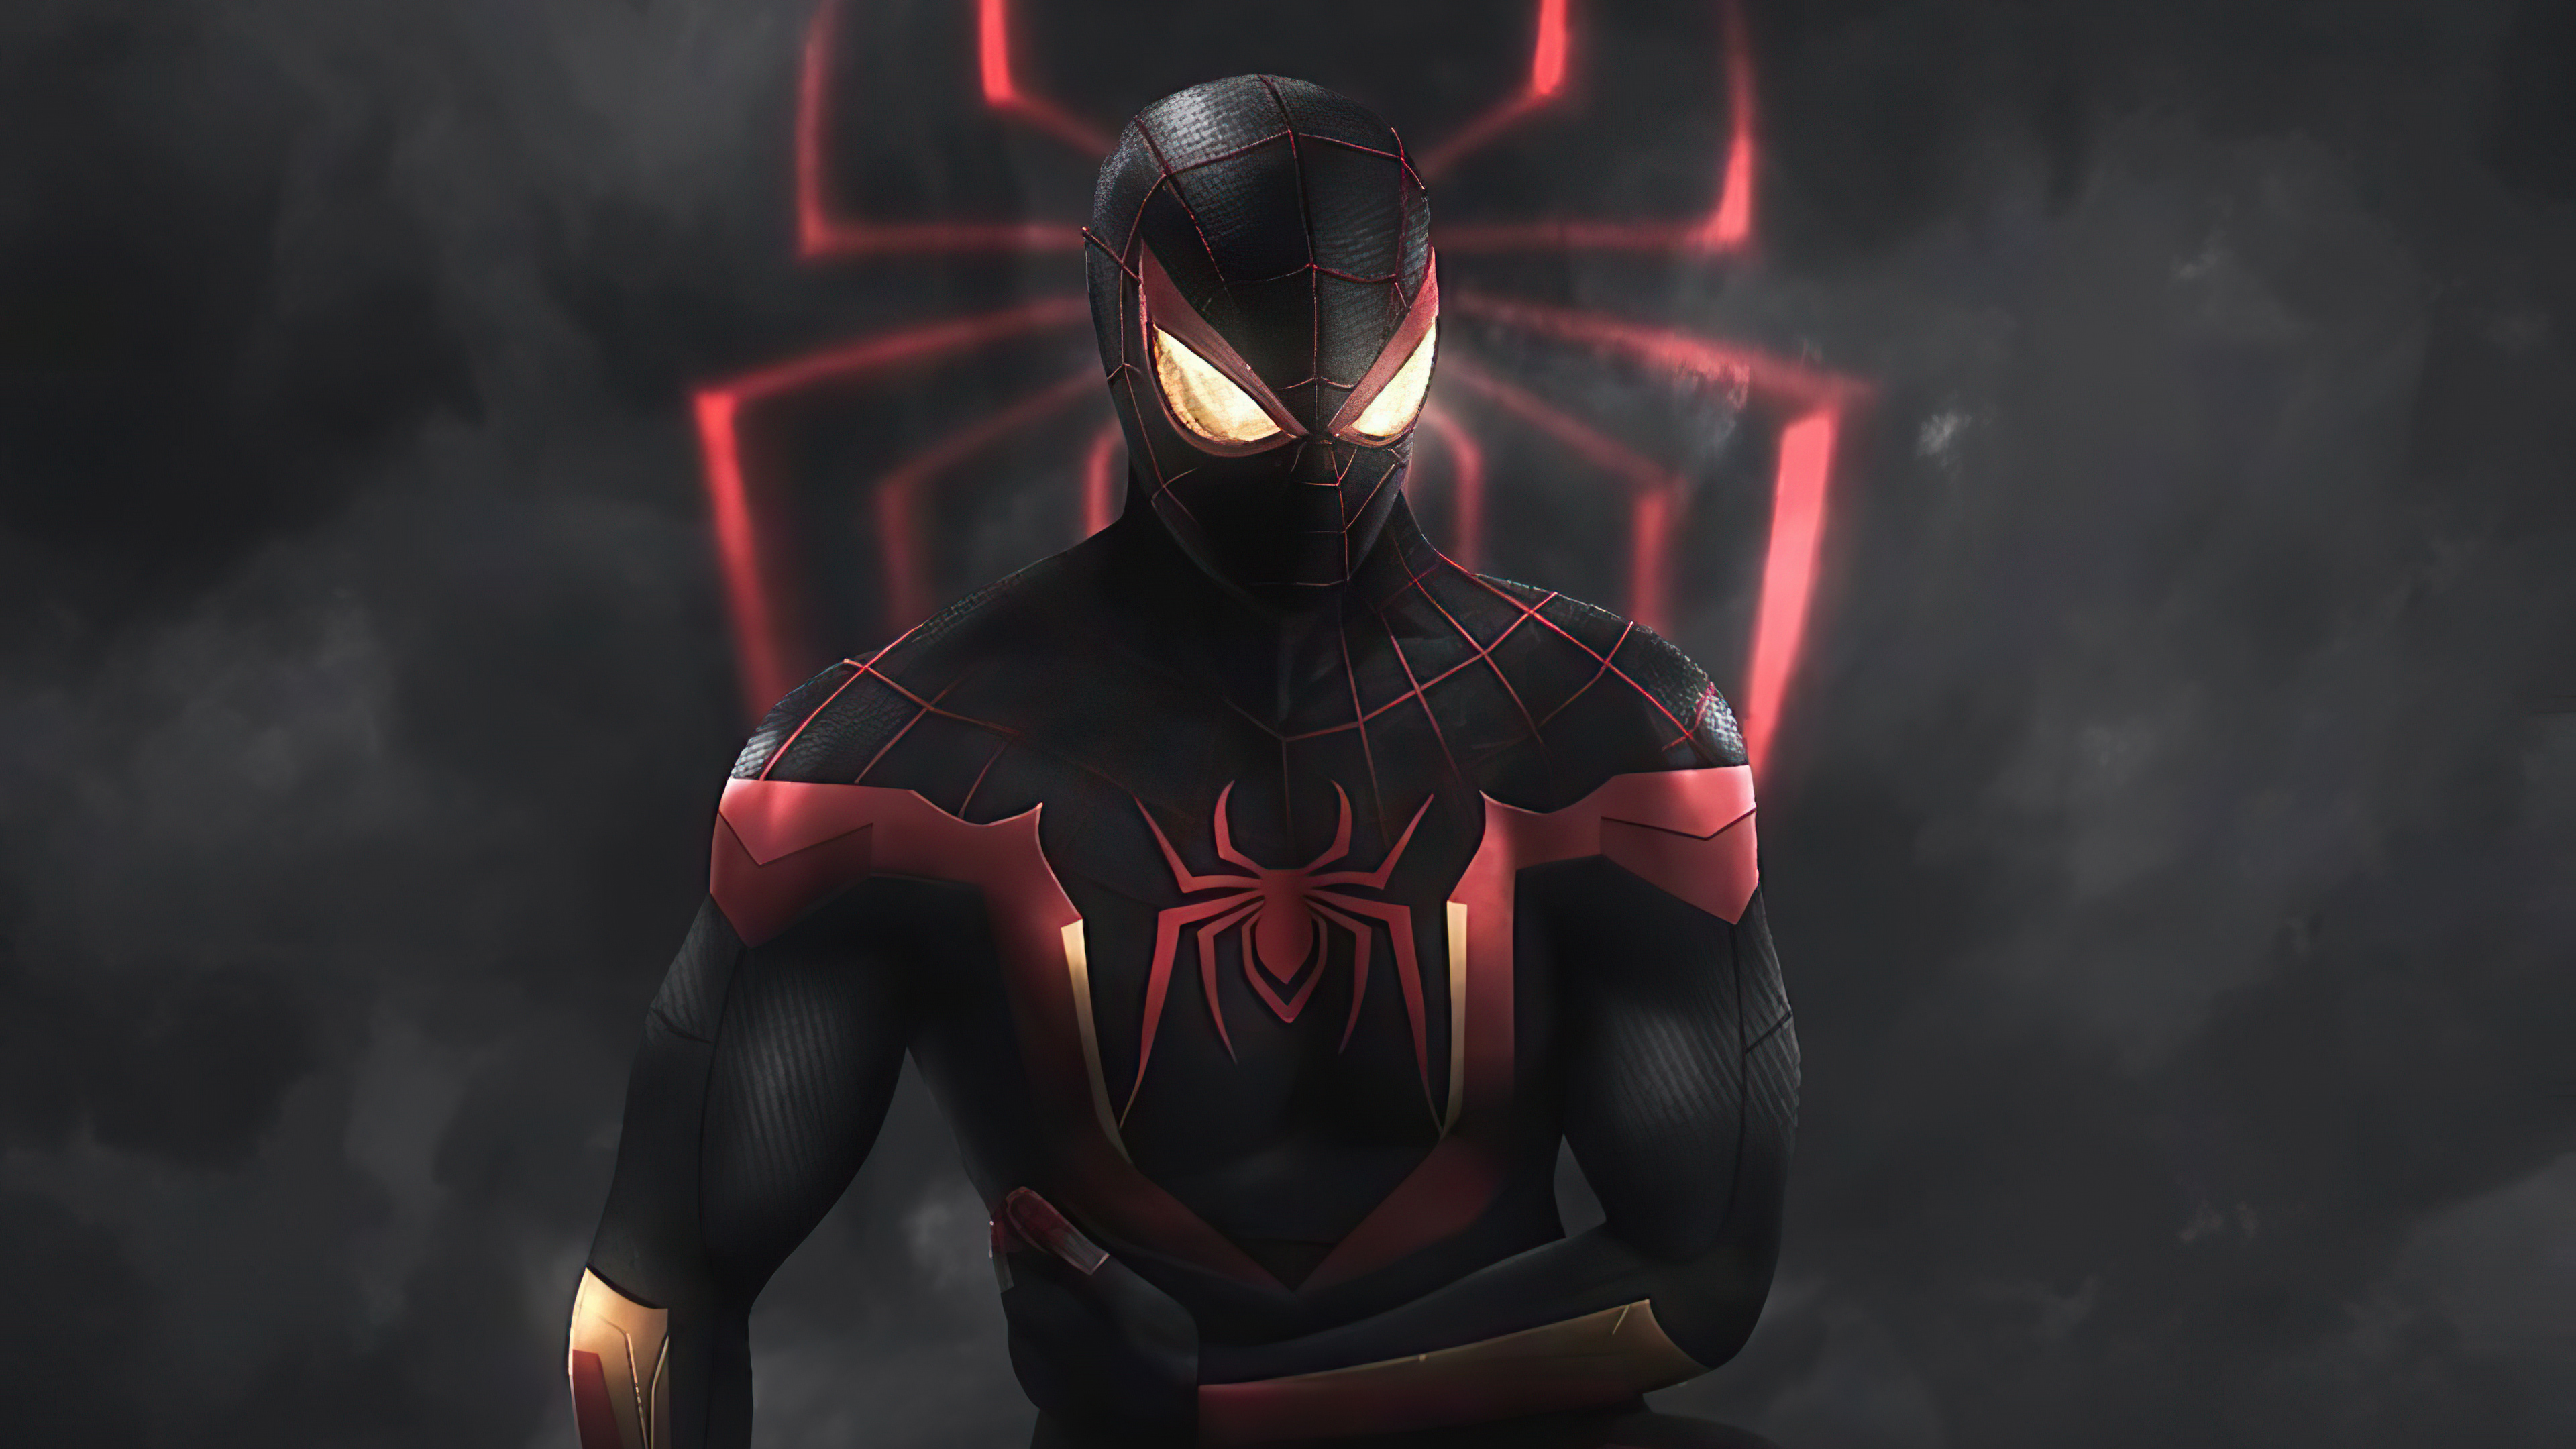 Spiderman with black and red suit Wallpaper 4k Ultra HD